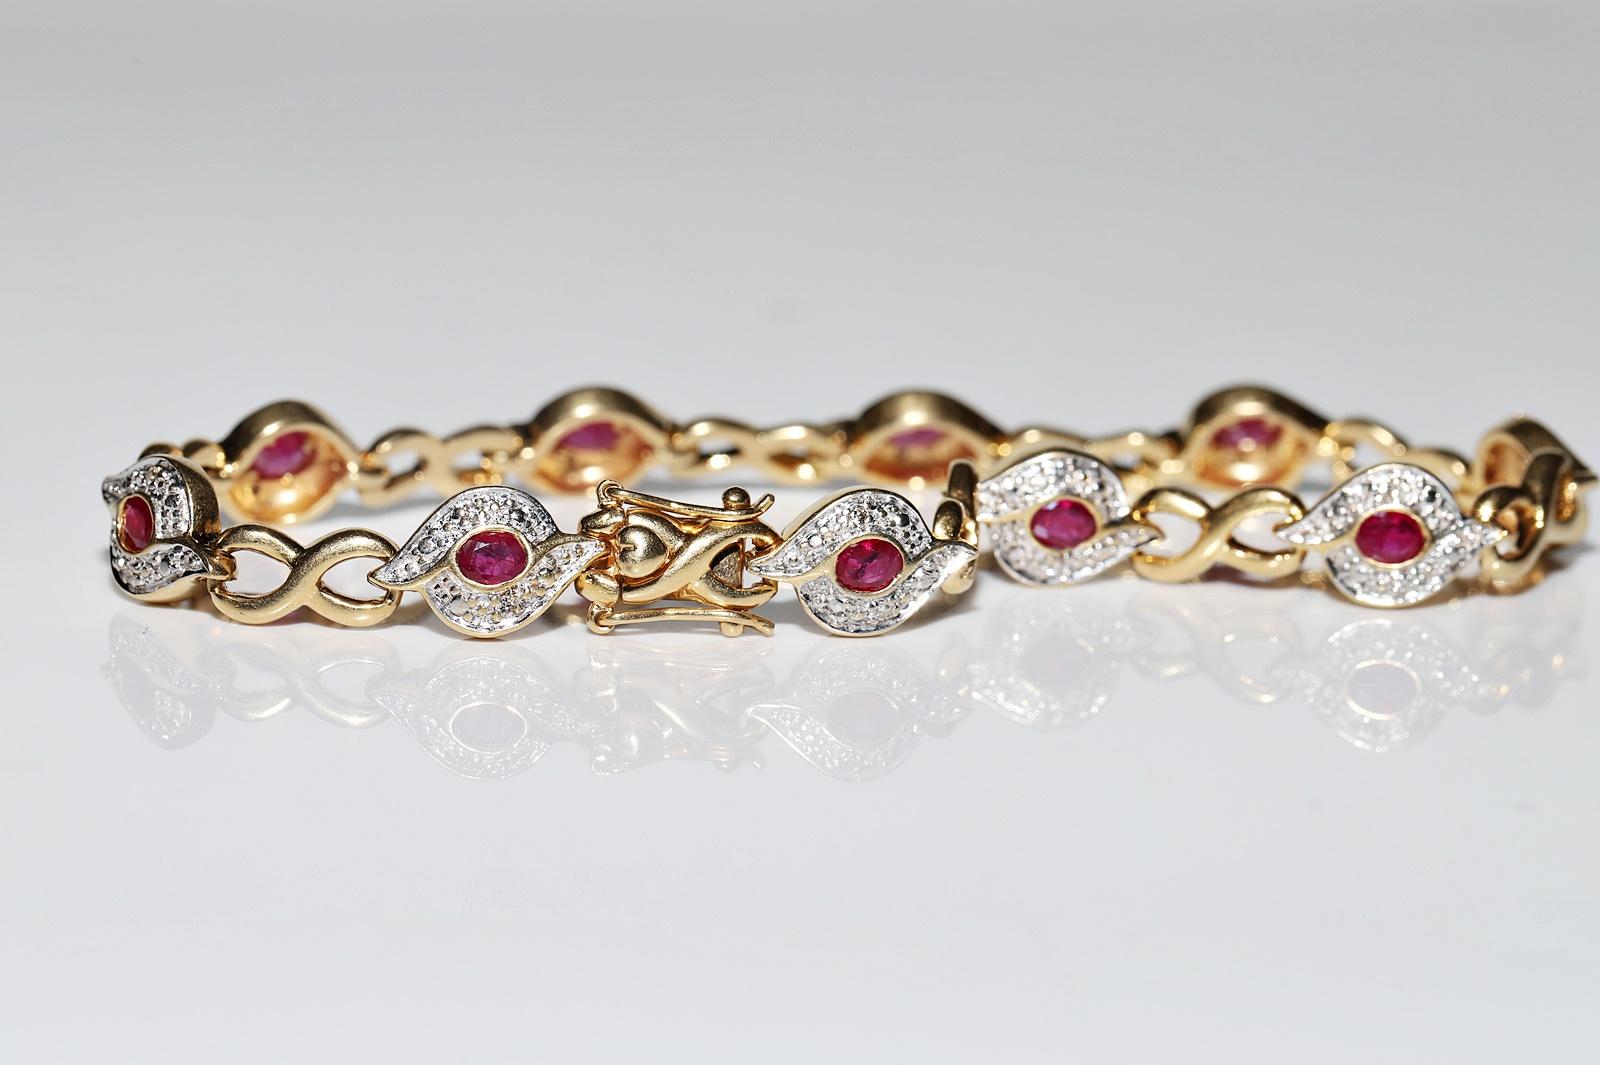 Vintage Circa 1980s 18k Gold Natural Diamond And Ruby Decorated Tennis Bracelet For Sale 2